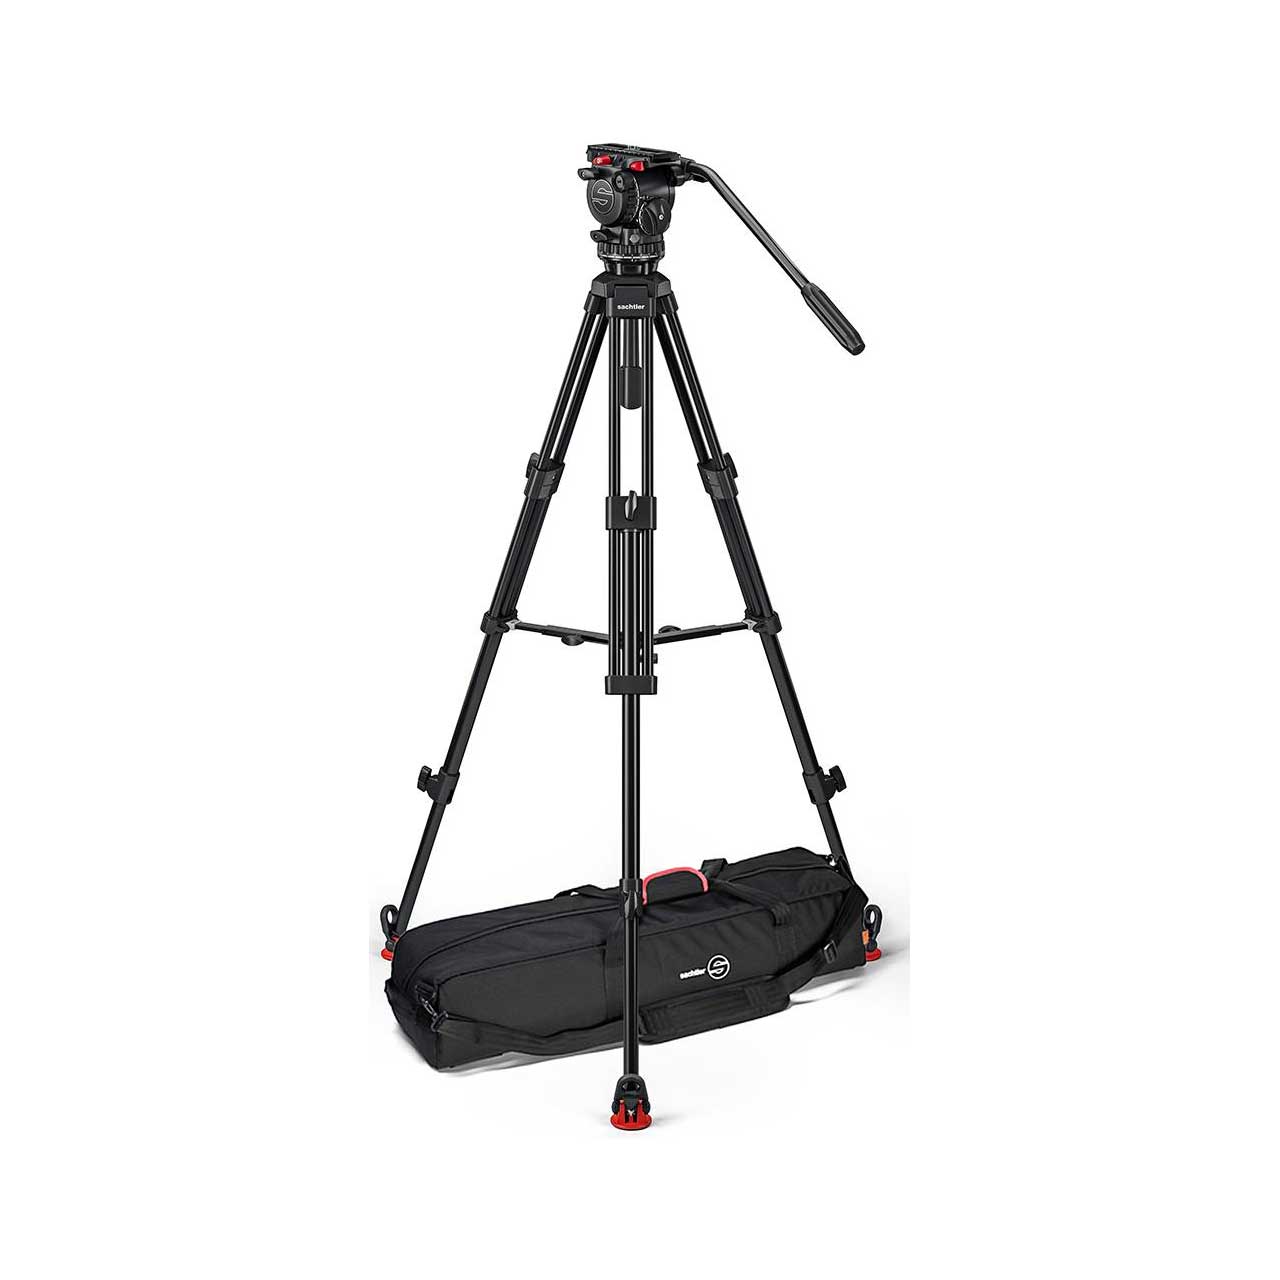 Sachtler 0773AM System FSB Sideload and 75/2 Aluminum Tripod Legs with Mid -Level Spreader and Bag